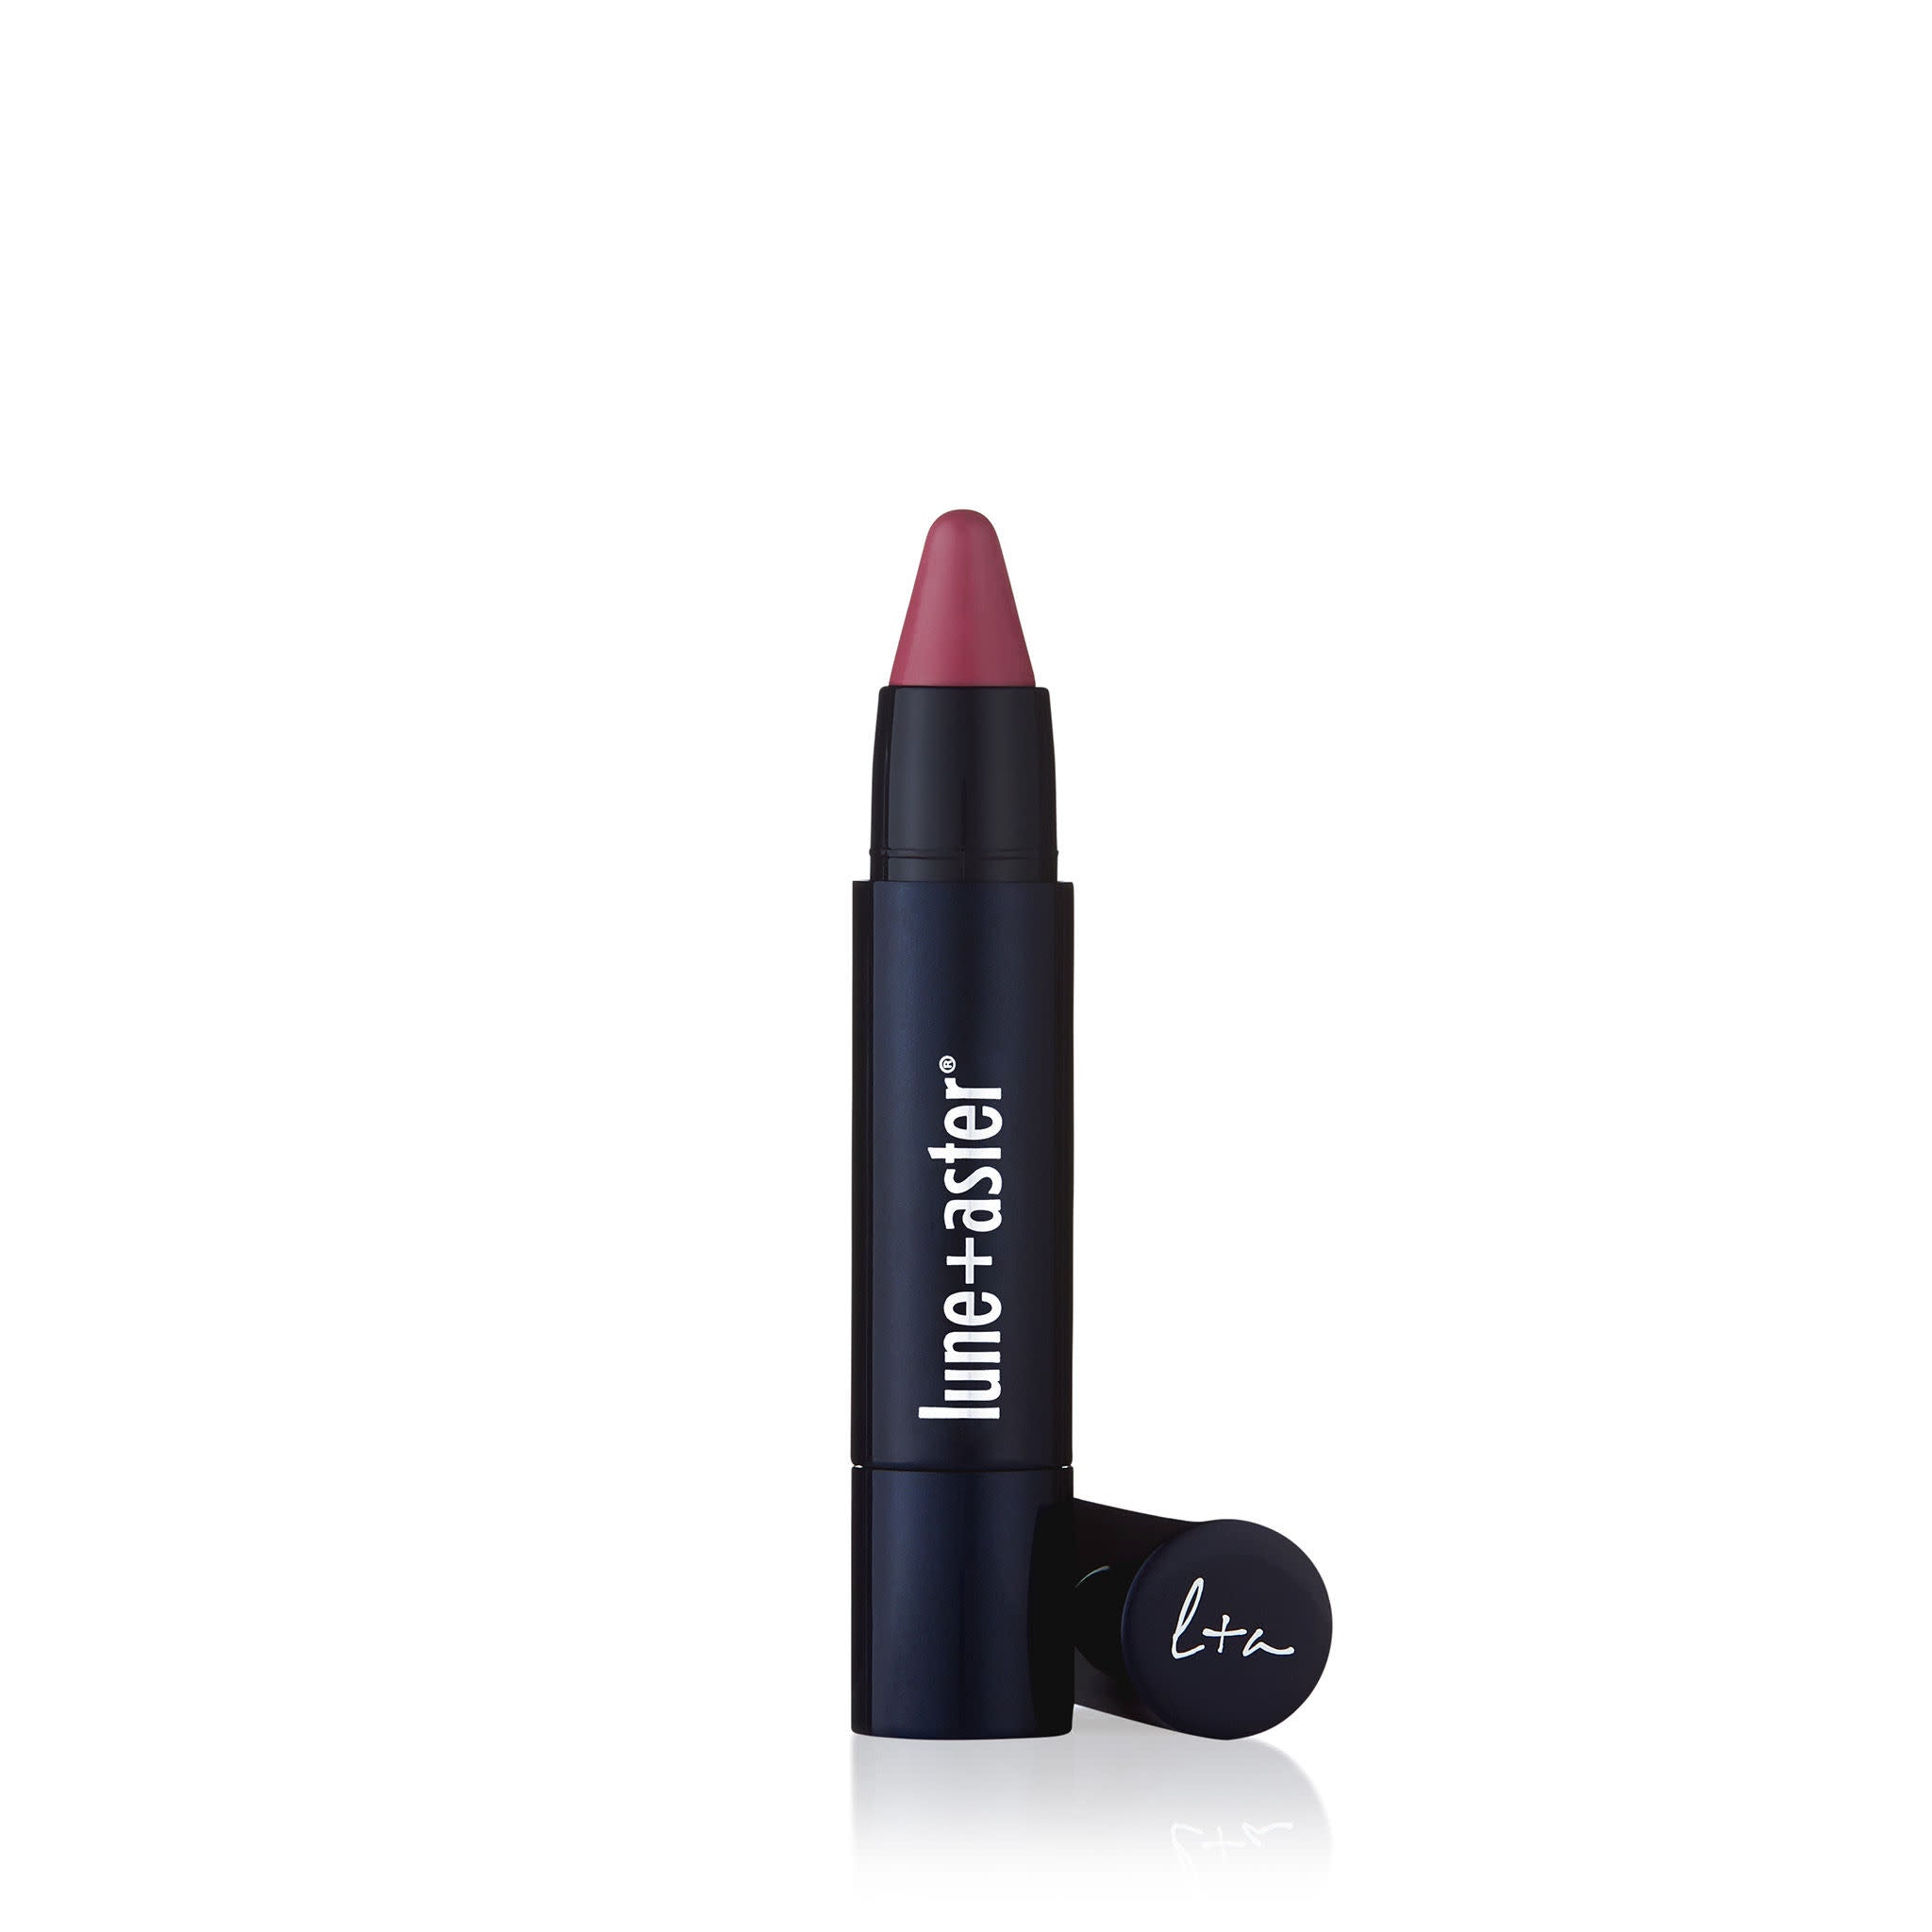 Lune+Aster PowerLips QuickStick Color/Shade variant: Double Booked main image. This product is in the color pink